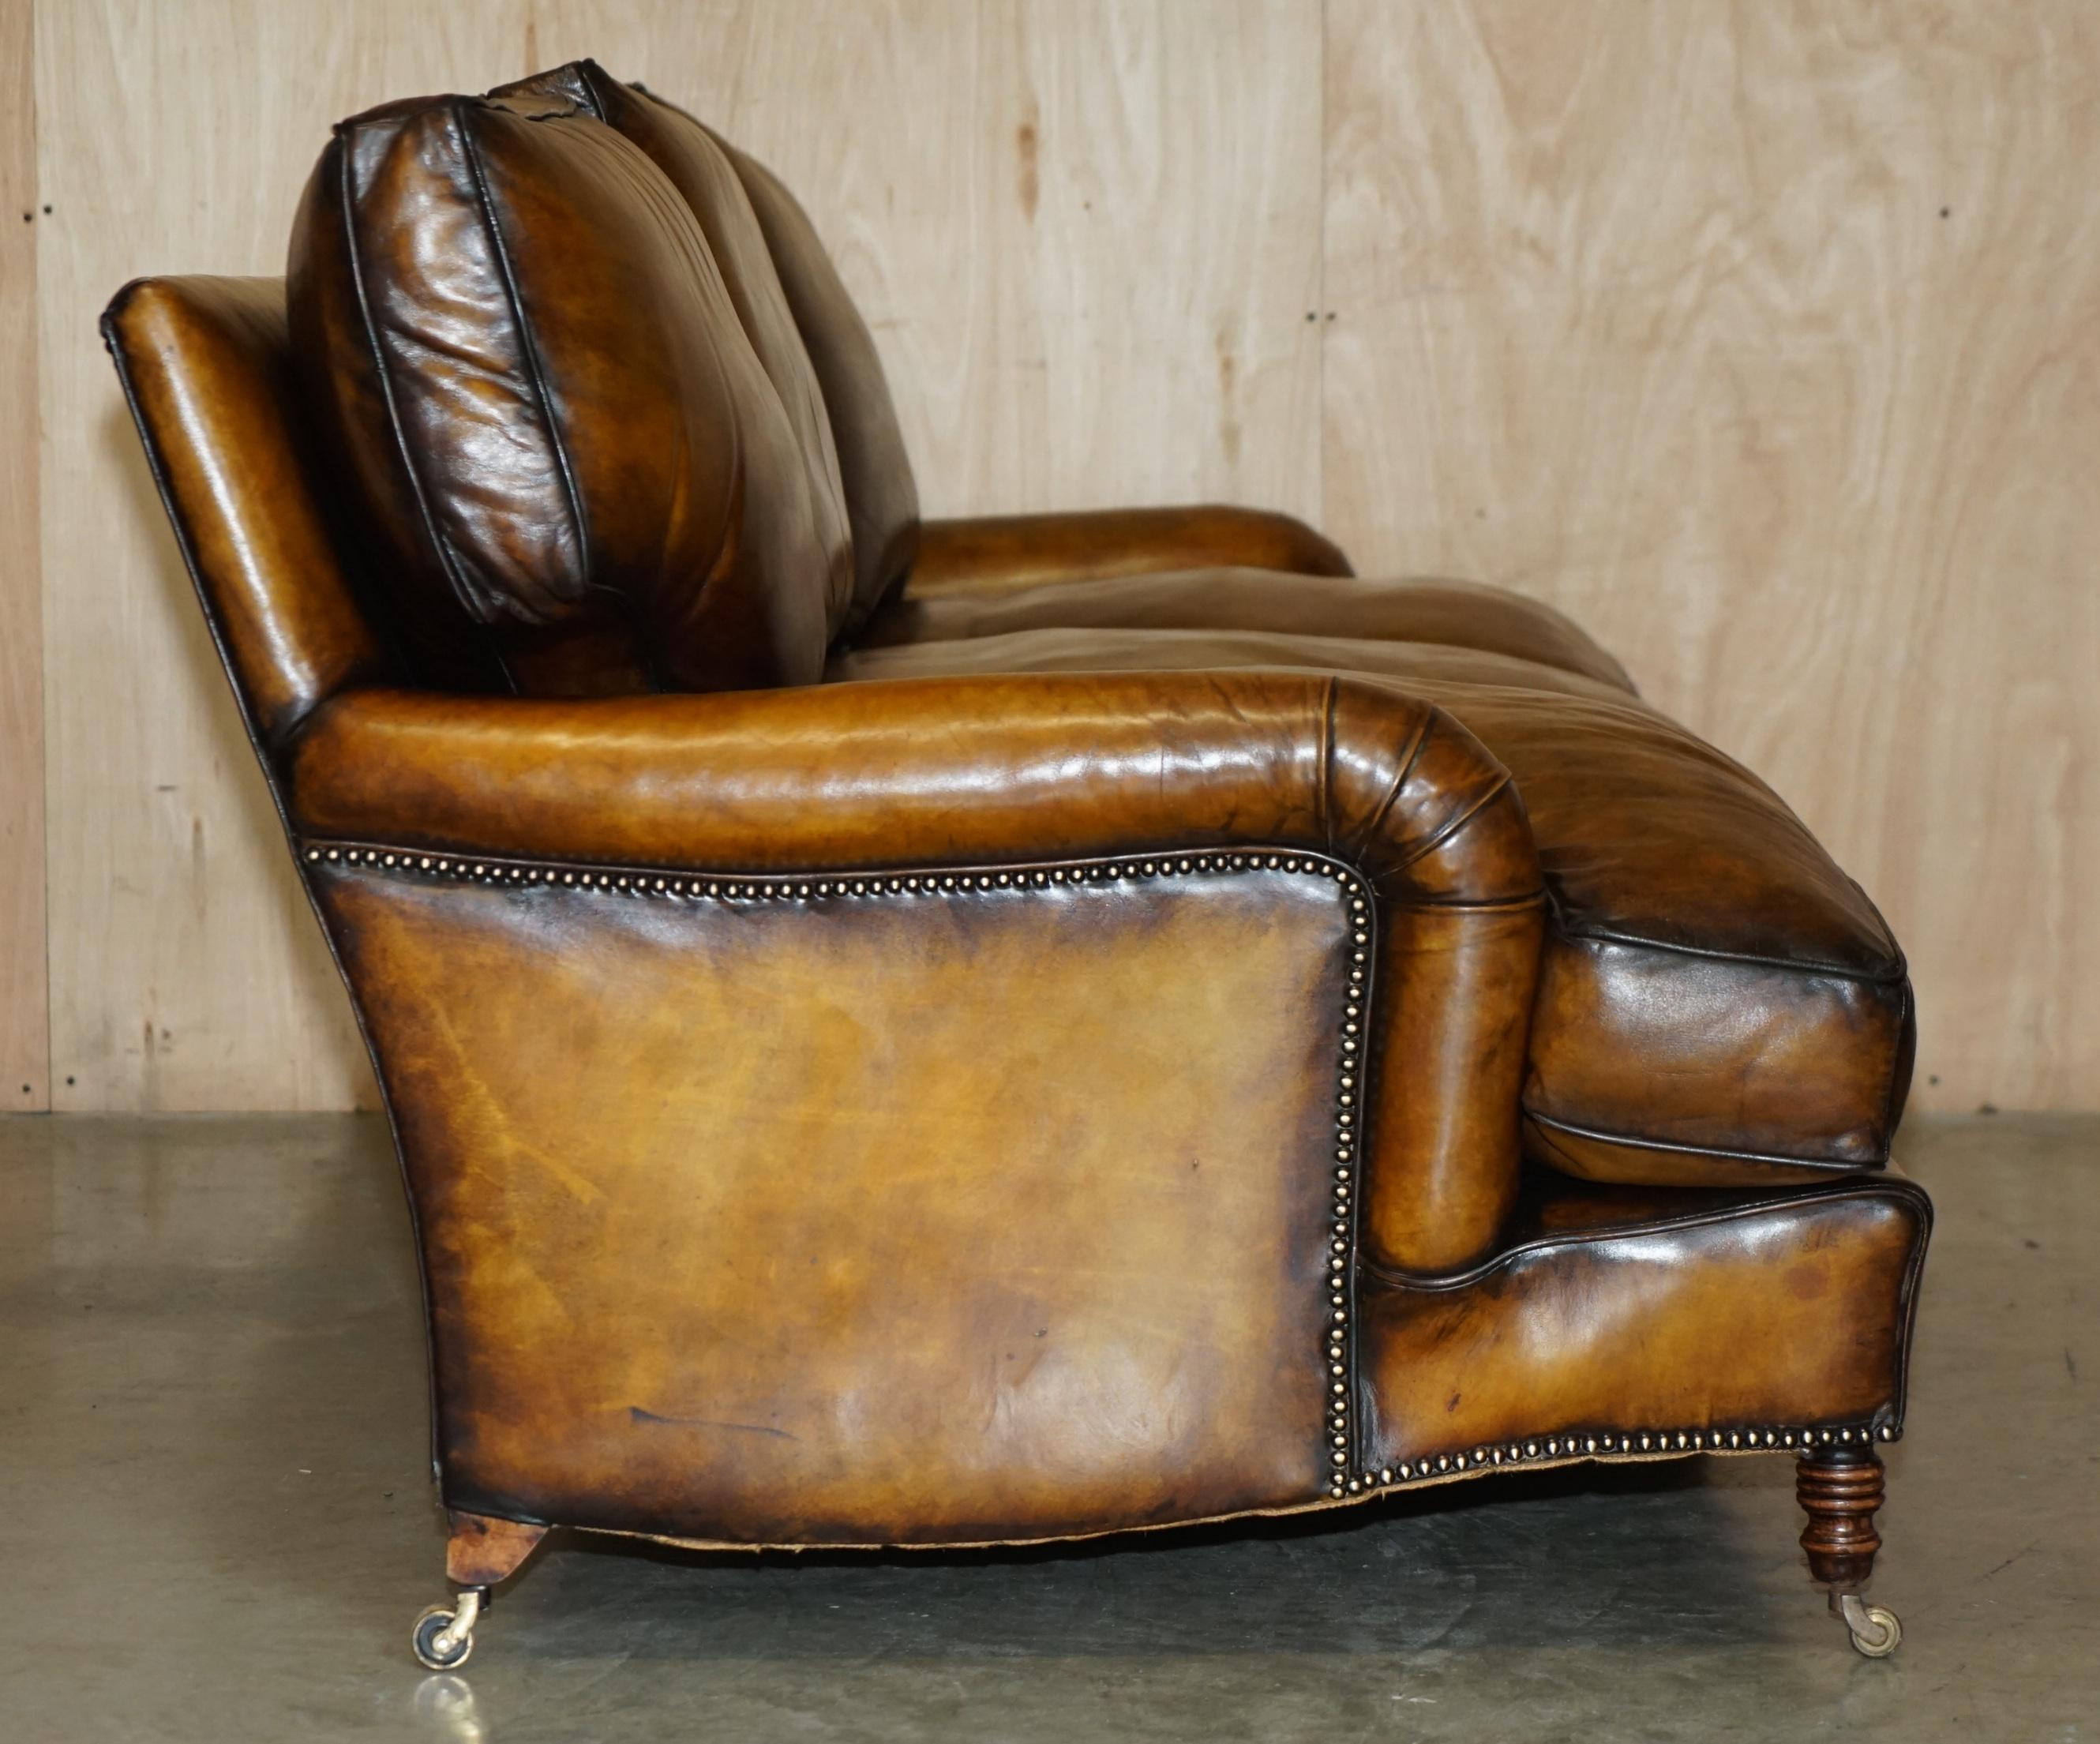 GEORGE SMITH RESTORED HOWARD & SON'S BROWN LEATHER SCROLL ARM SOFA en vente 11